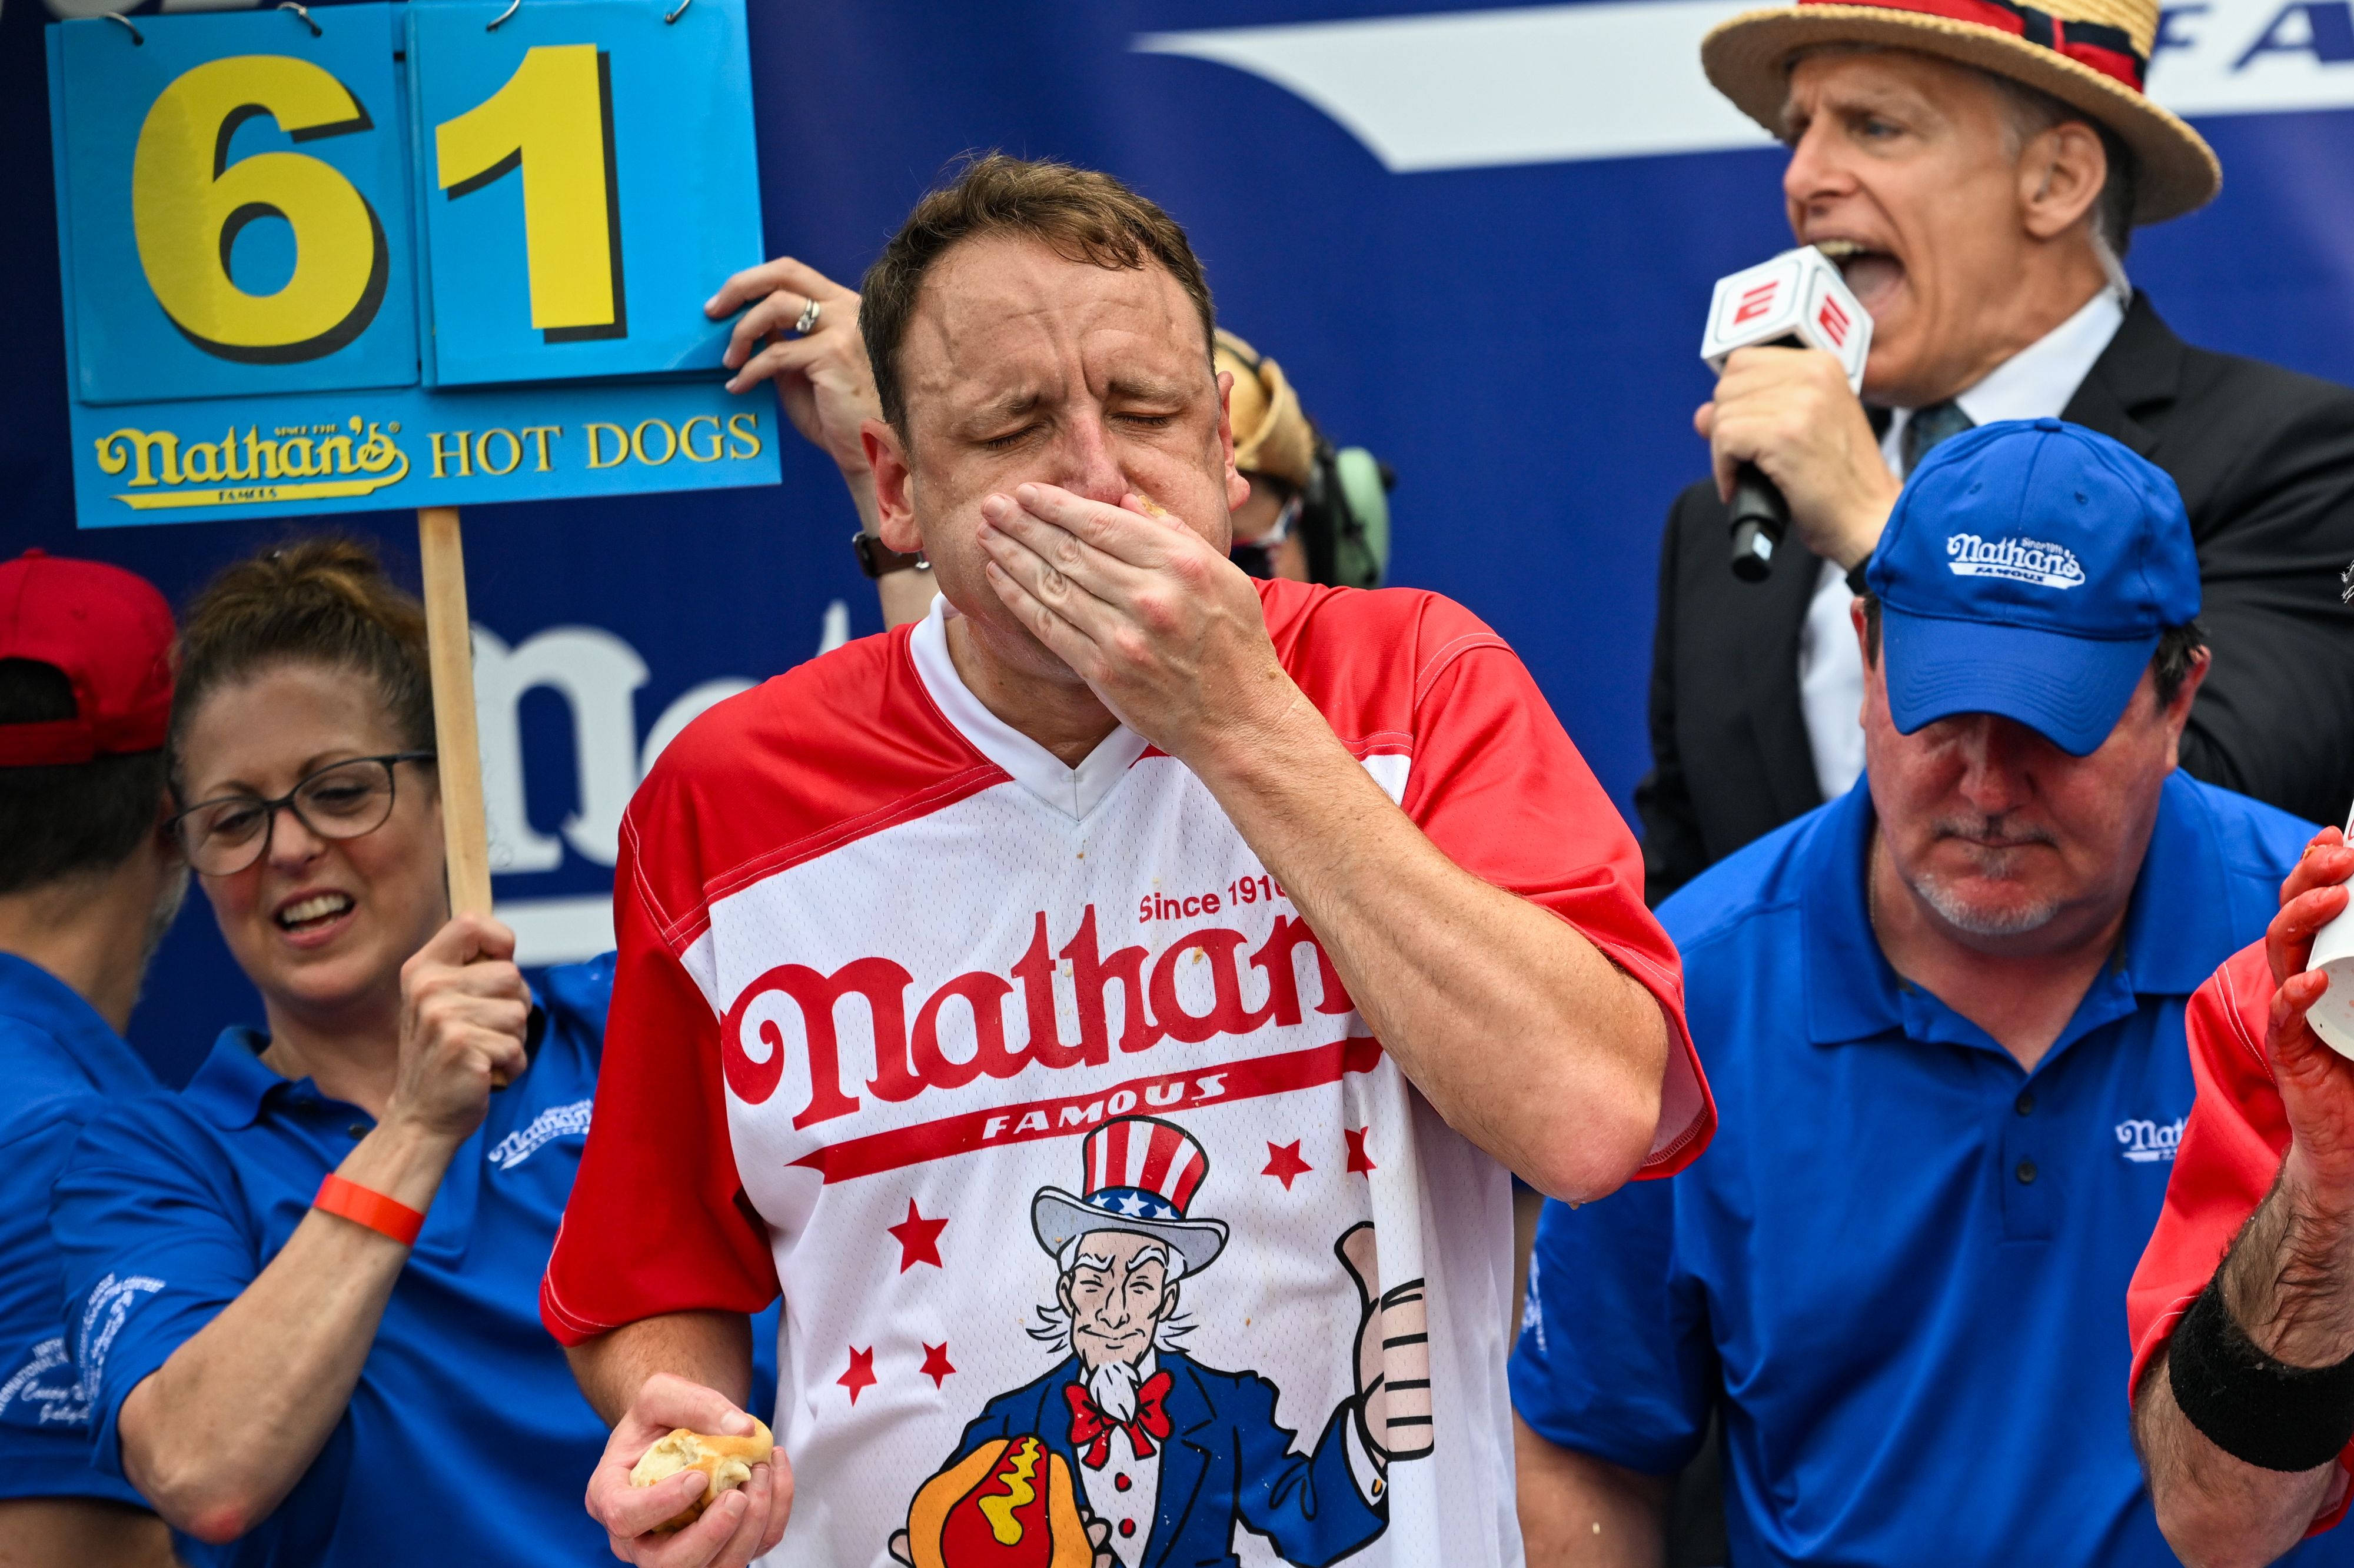 Defending champion Joey Chestnut competes in the 2023 Nathan's Famous Fourth of July International Hot Dog Eating Contest on July 4, 2023 at Coney Island in the Brooklyn borough of New York City. The men's contest was postponed due to thunderstorms but later happened without spectators allowed into the "arena." The annual contest, which began in 1972, draws thousands of spectators to Nathan’s Famous located on Surf Avenue. 